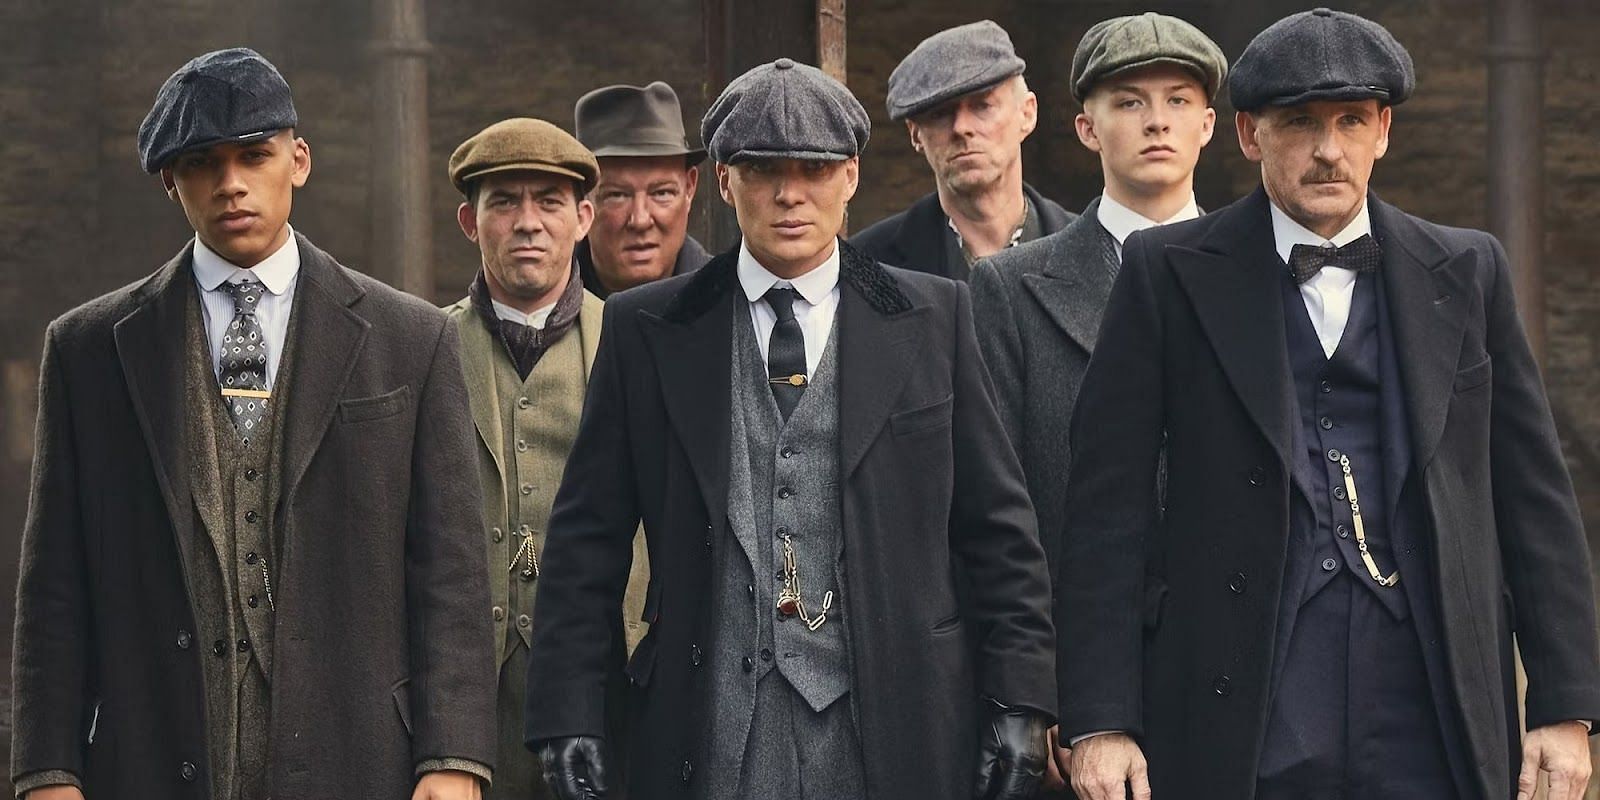 How many seasons of Peaky Blinders are there?